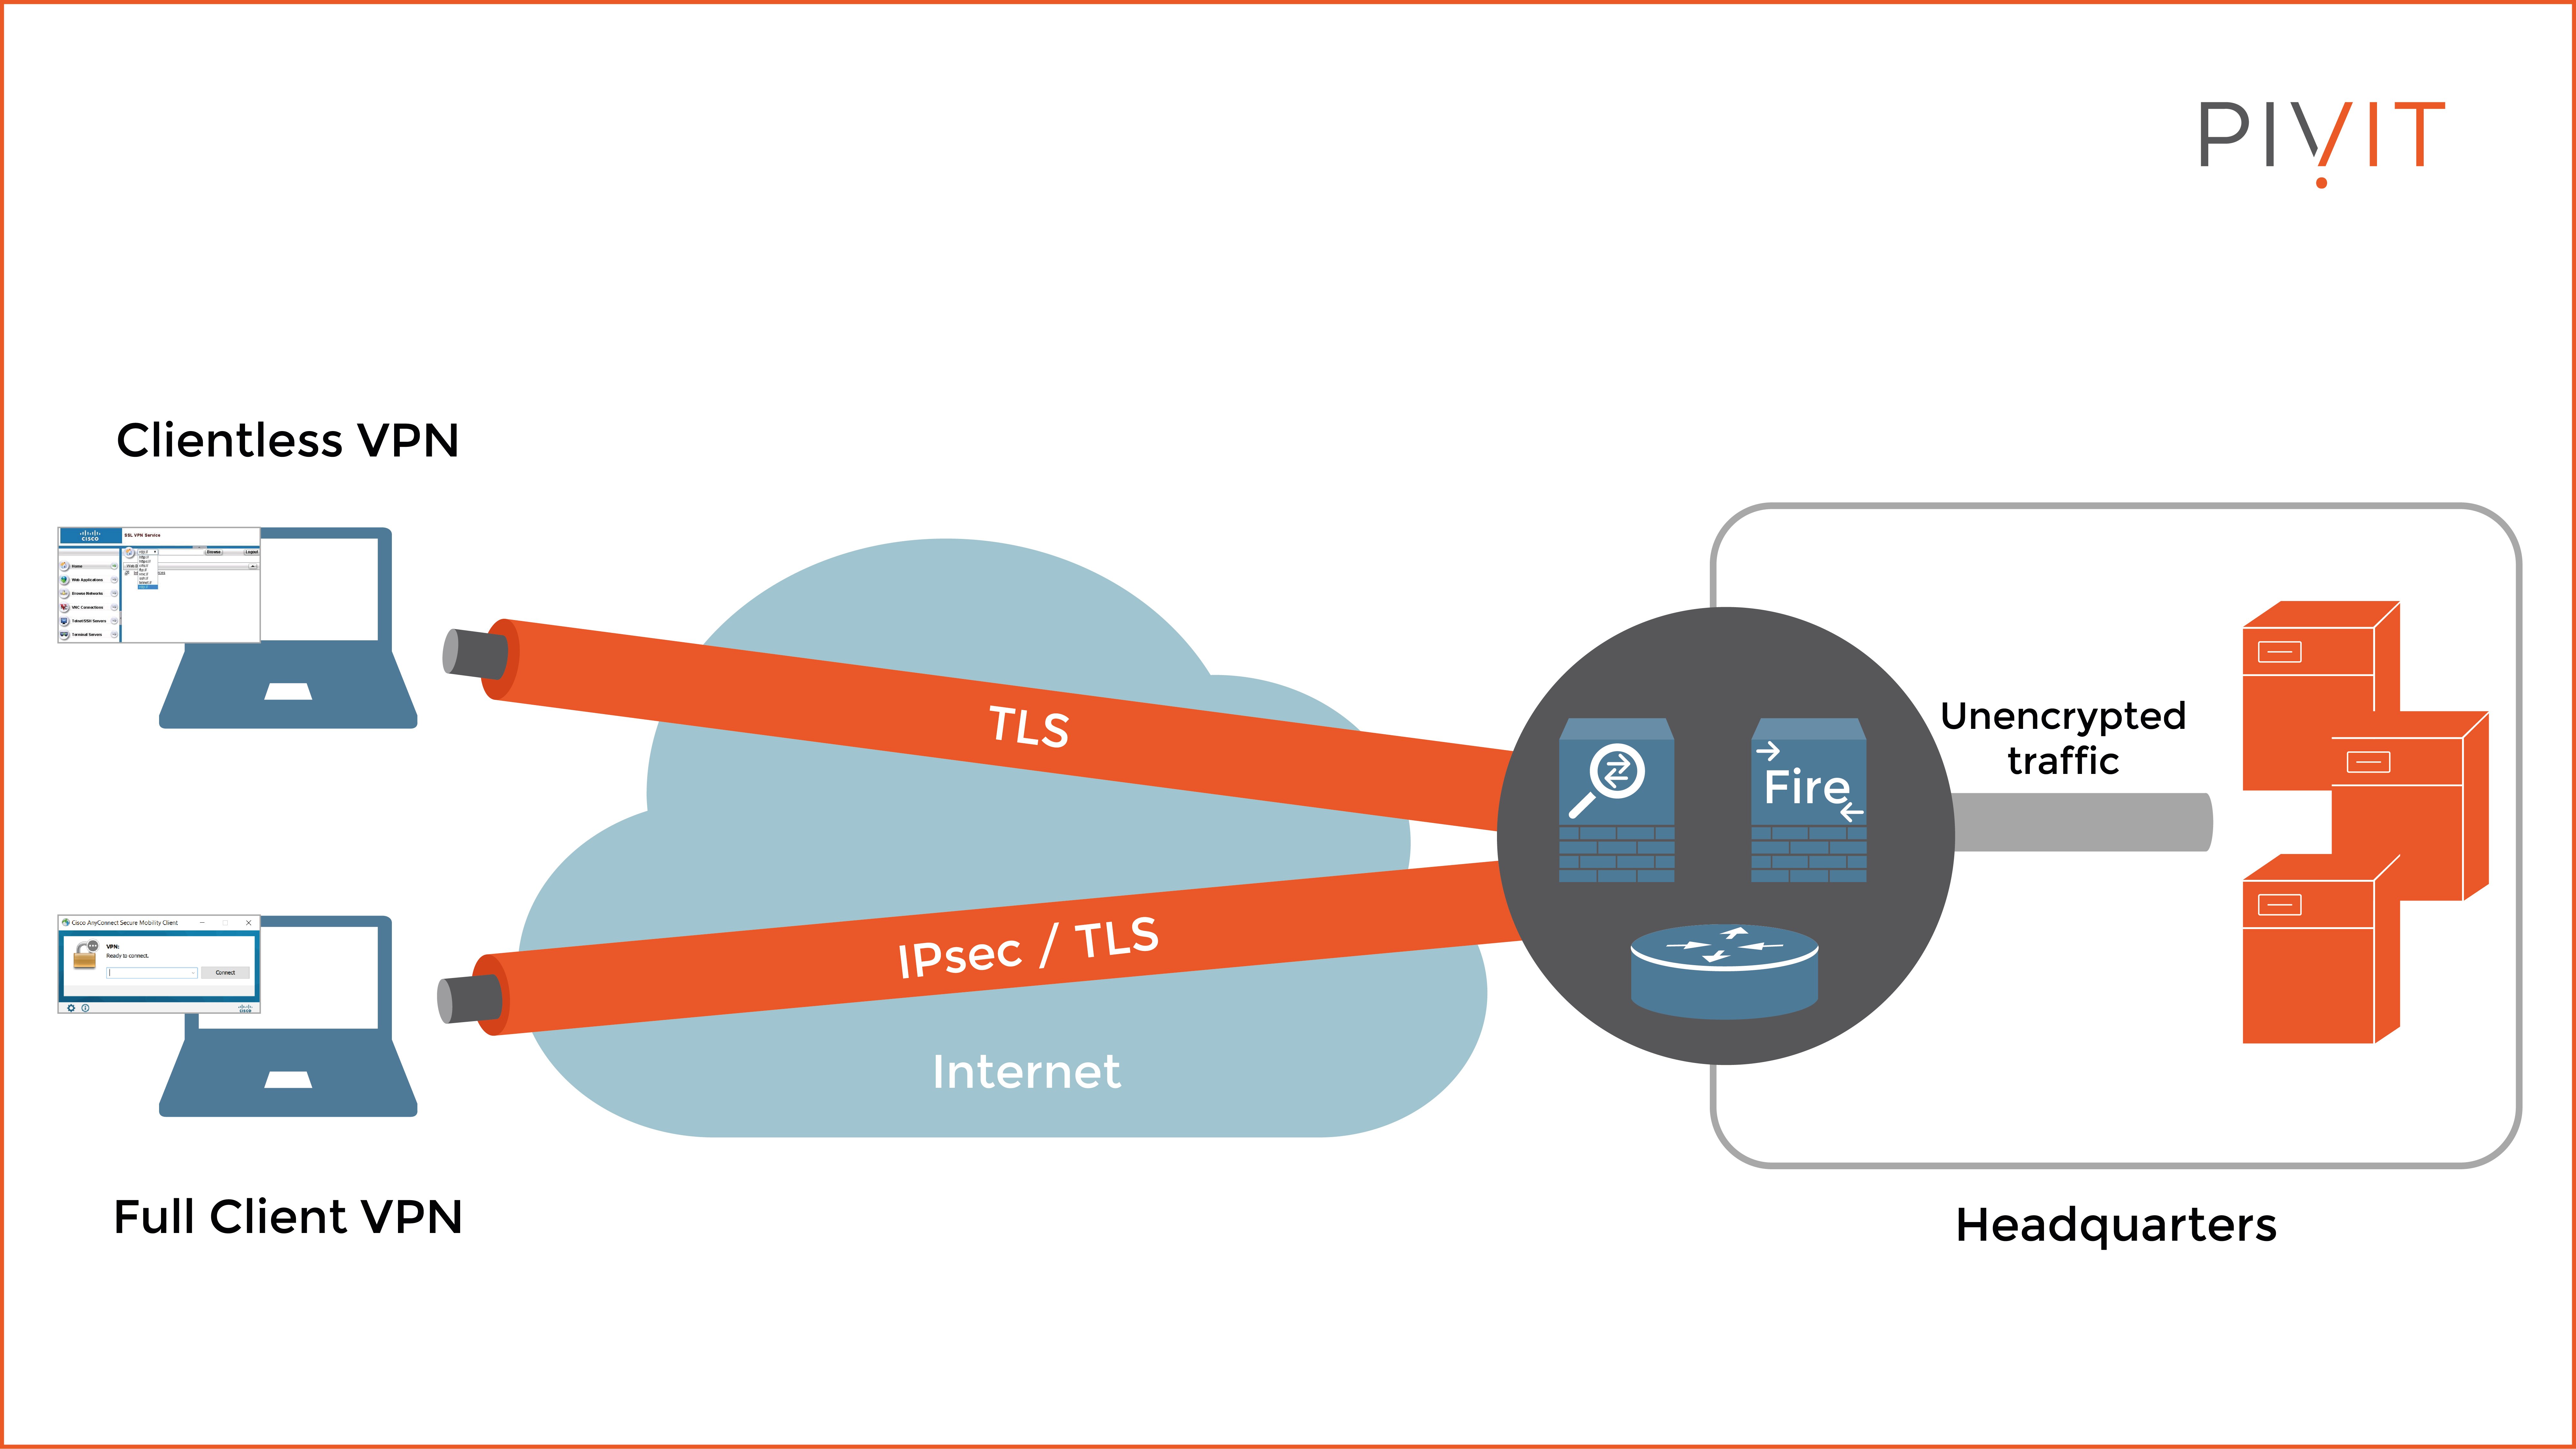 Remote access VPN deployment between headquarters and remote users using TLS or IPsec